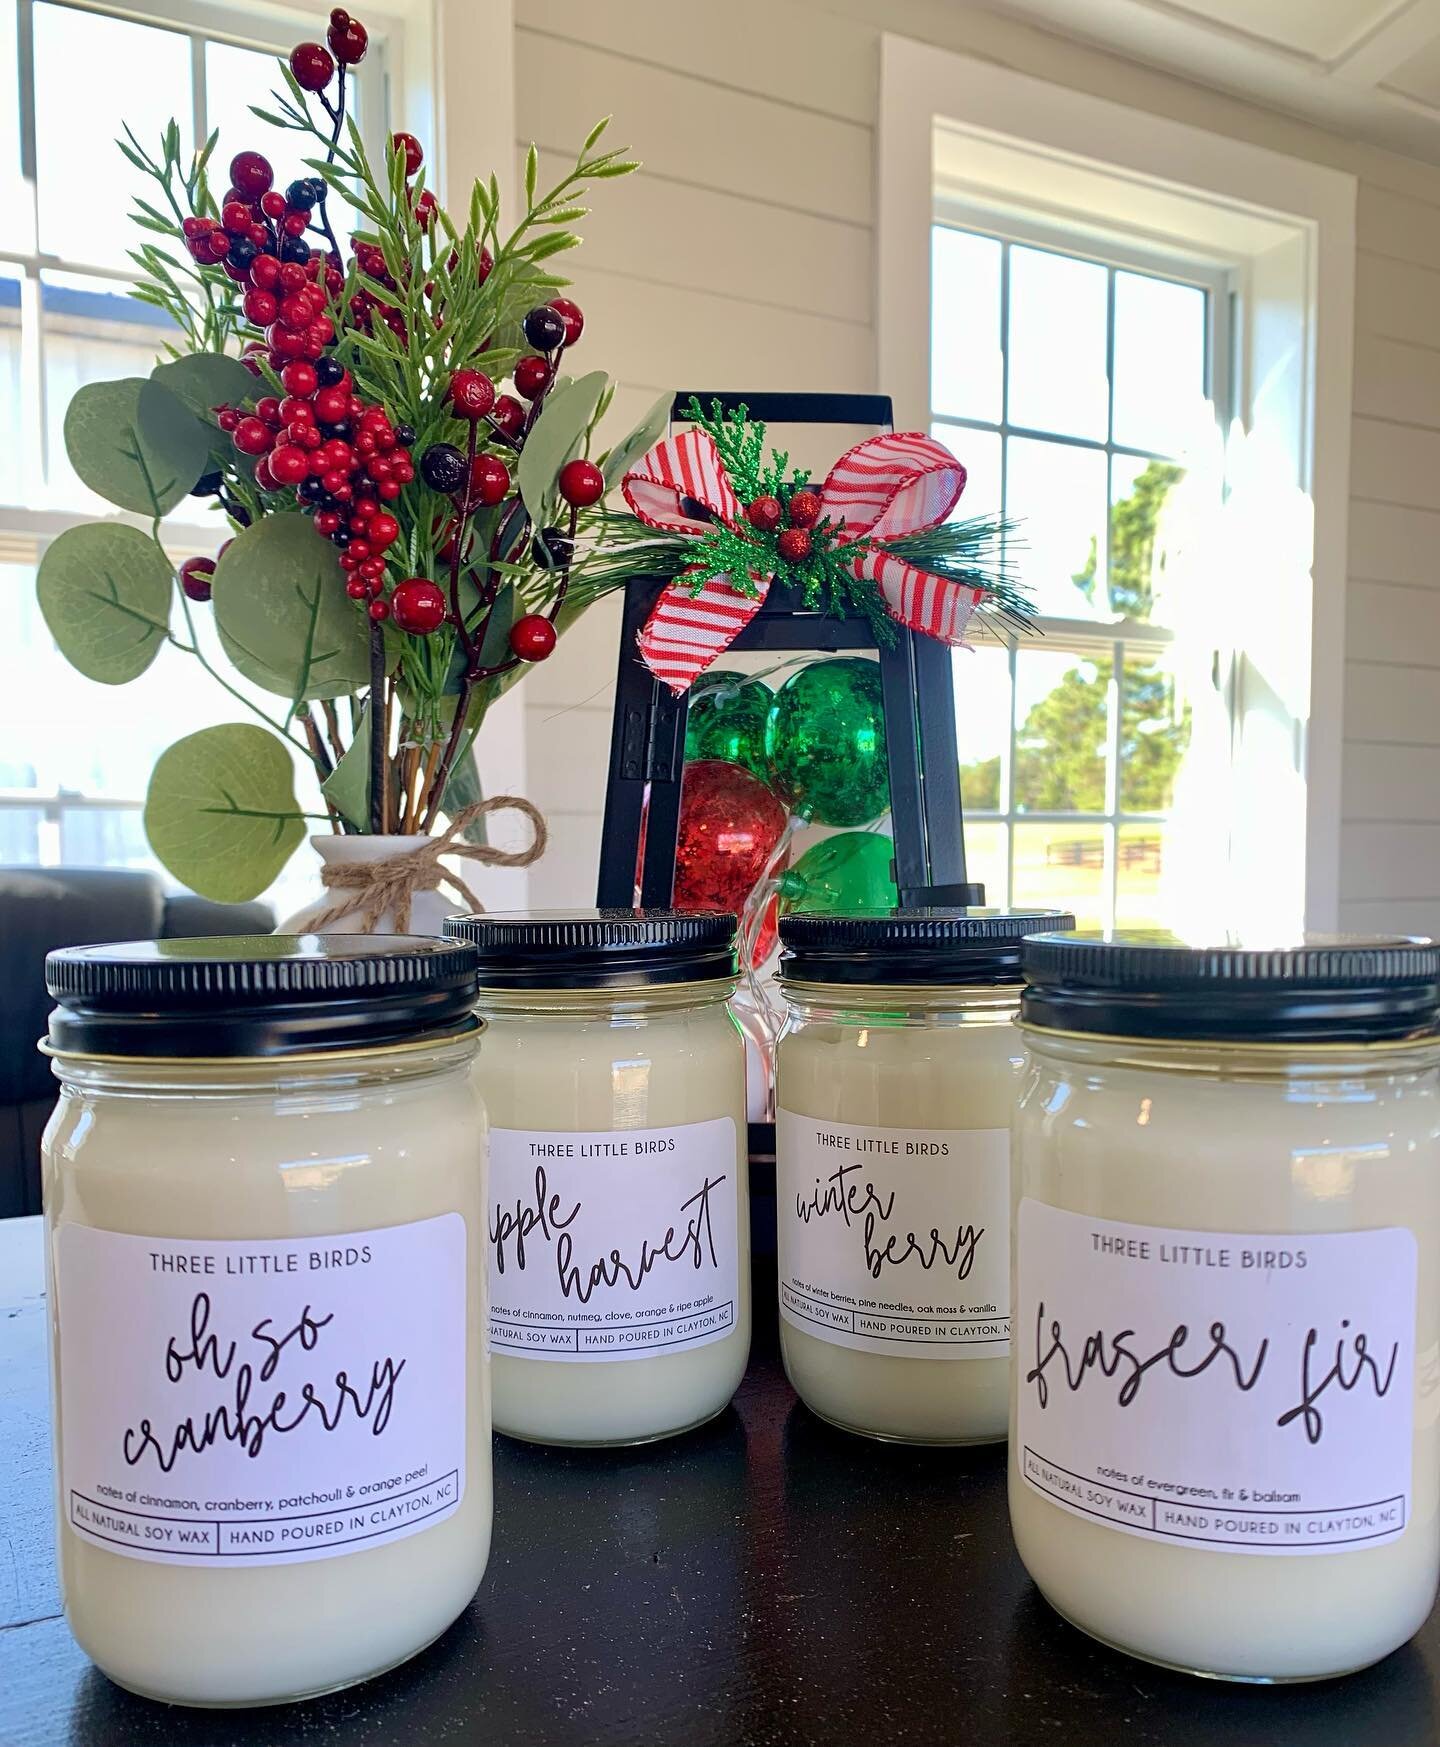 We are so excited to announce we are carrying candles! 

Hand dipped in Clayton nc at Three Little Birds

Winter Berry
All the classic holiday scents including pine needles and oakmoss with a splash of winter berries on top.&nbsp;

Oh So Cranberry co